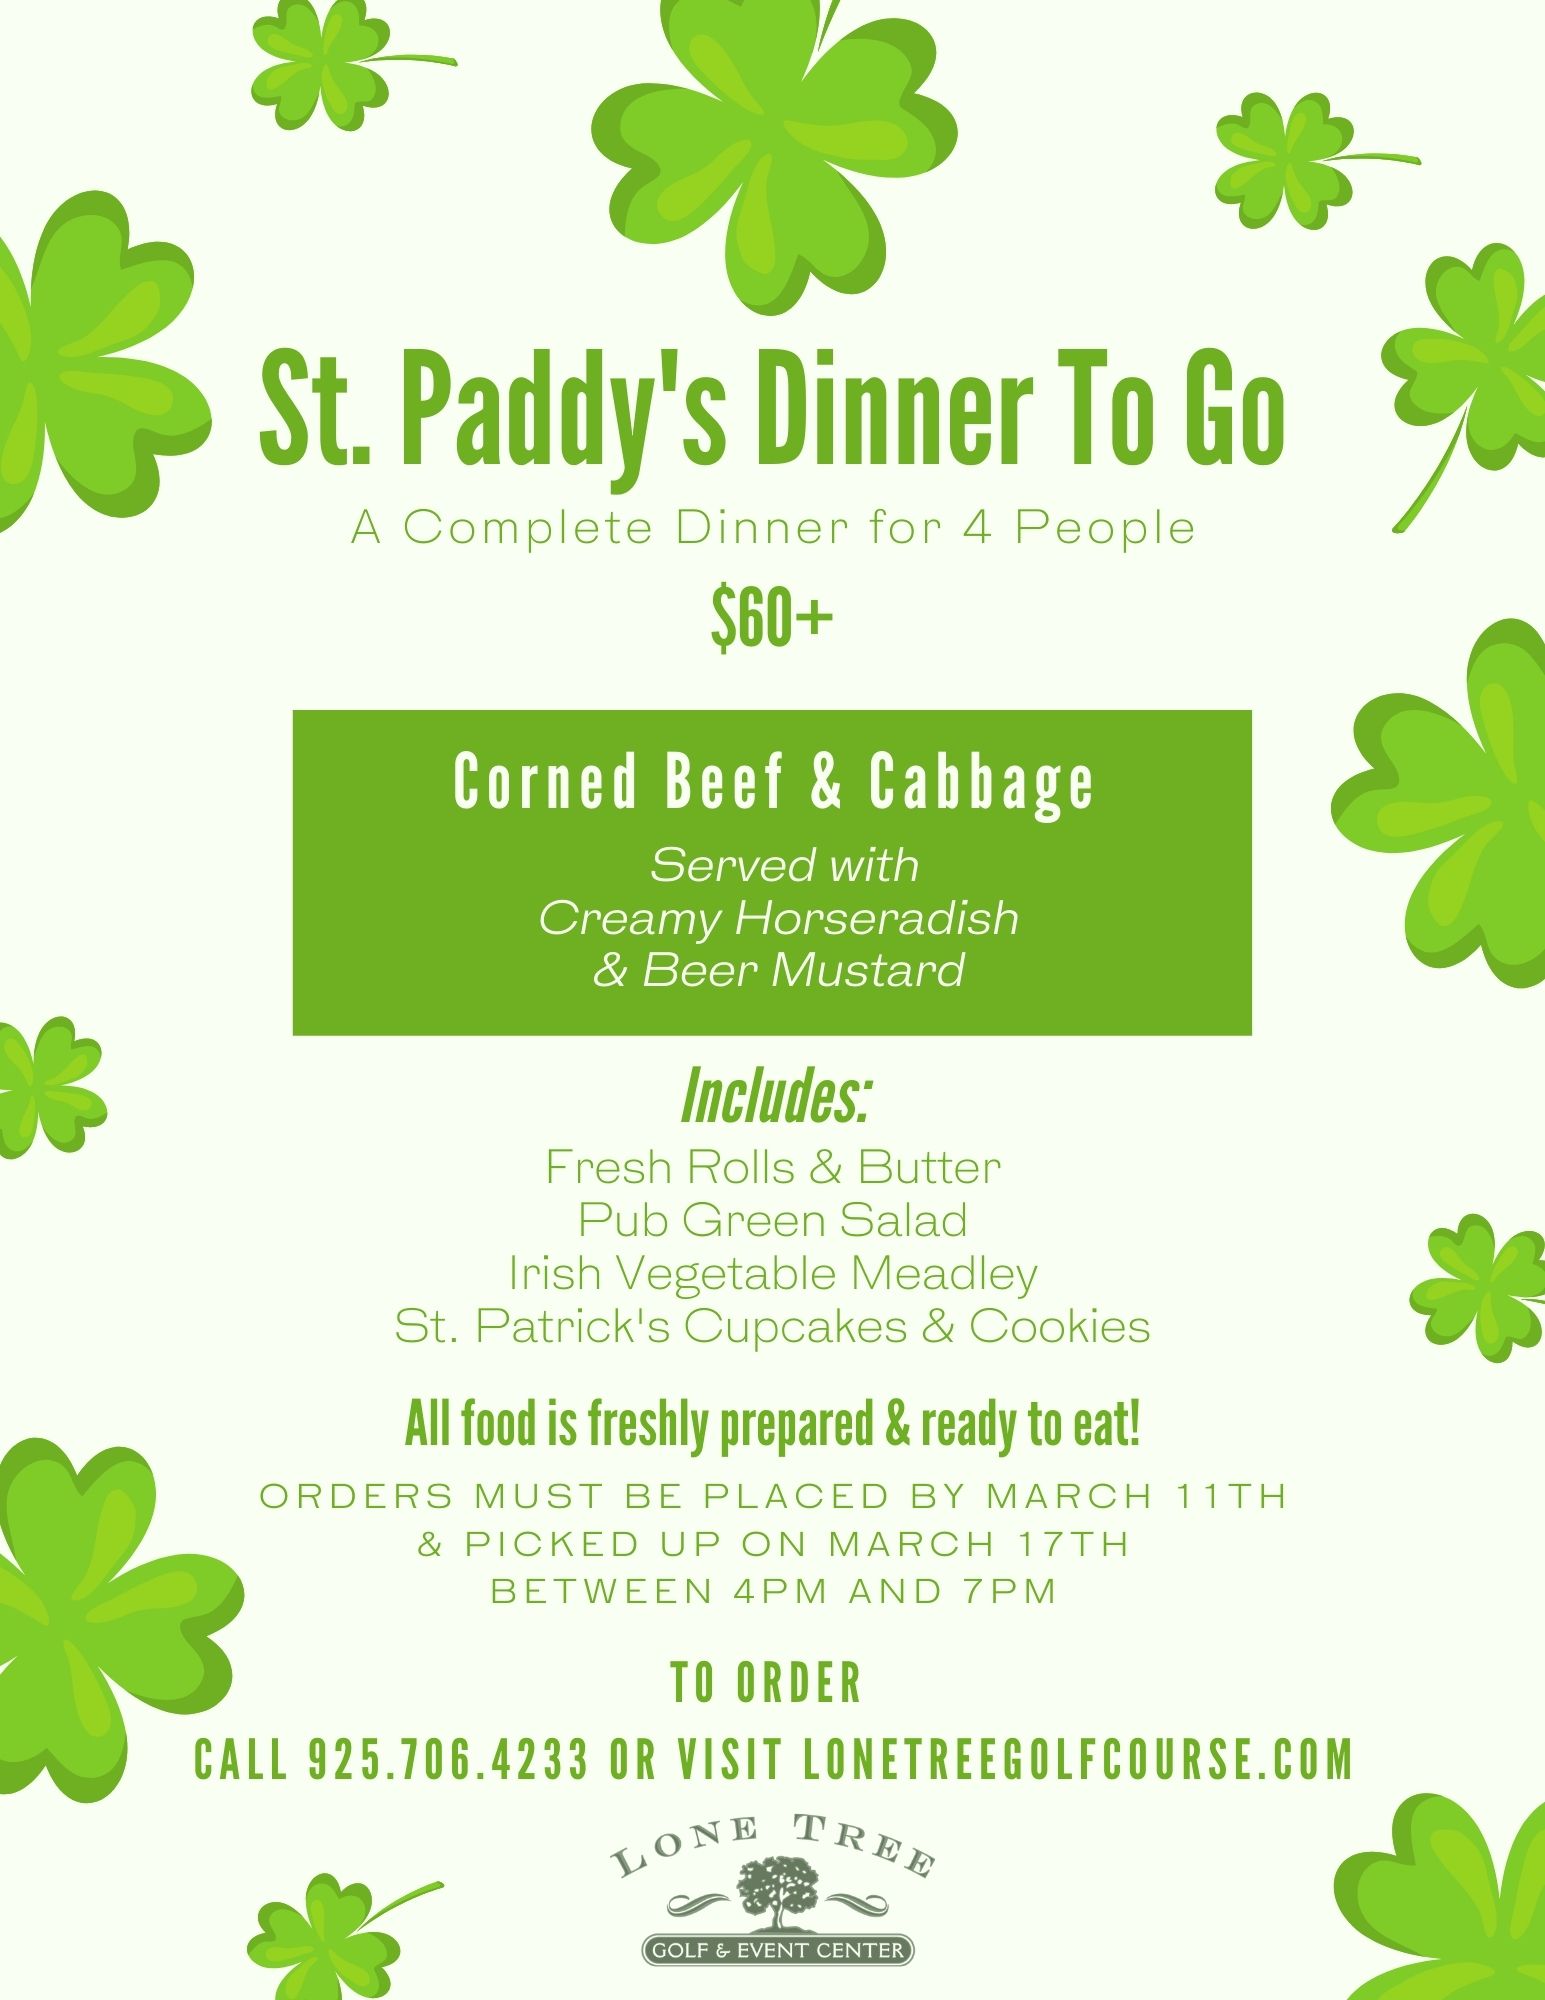 St. Paddys Dinner To Go 2.28.21 1